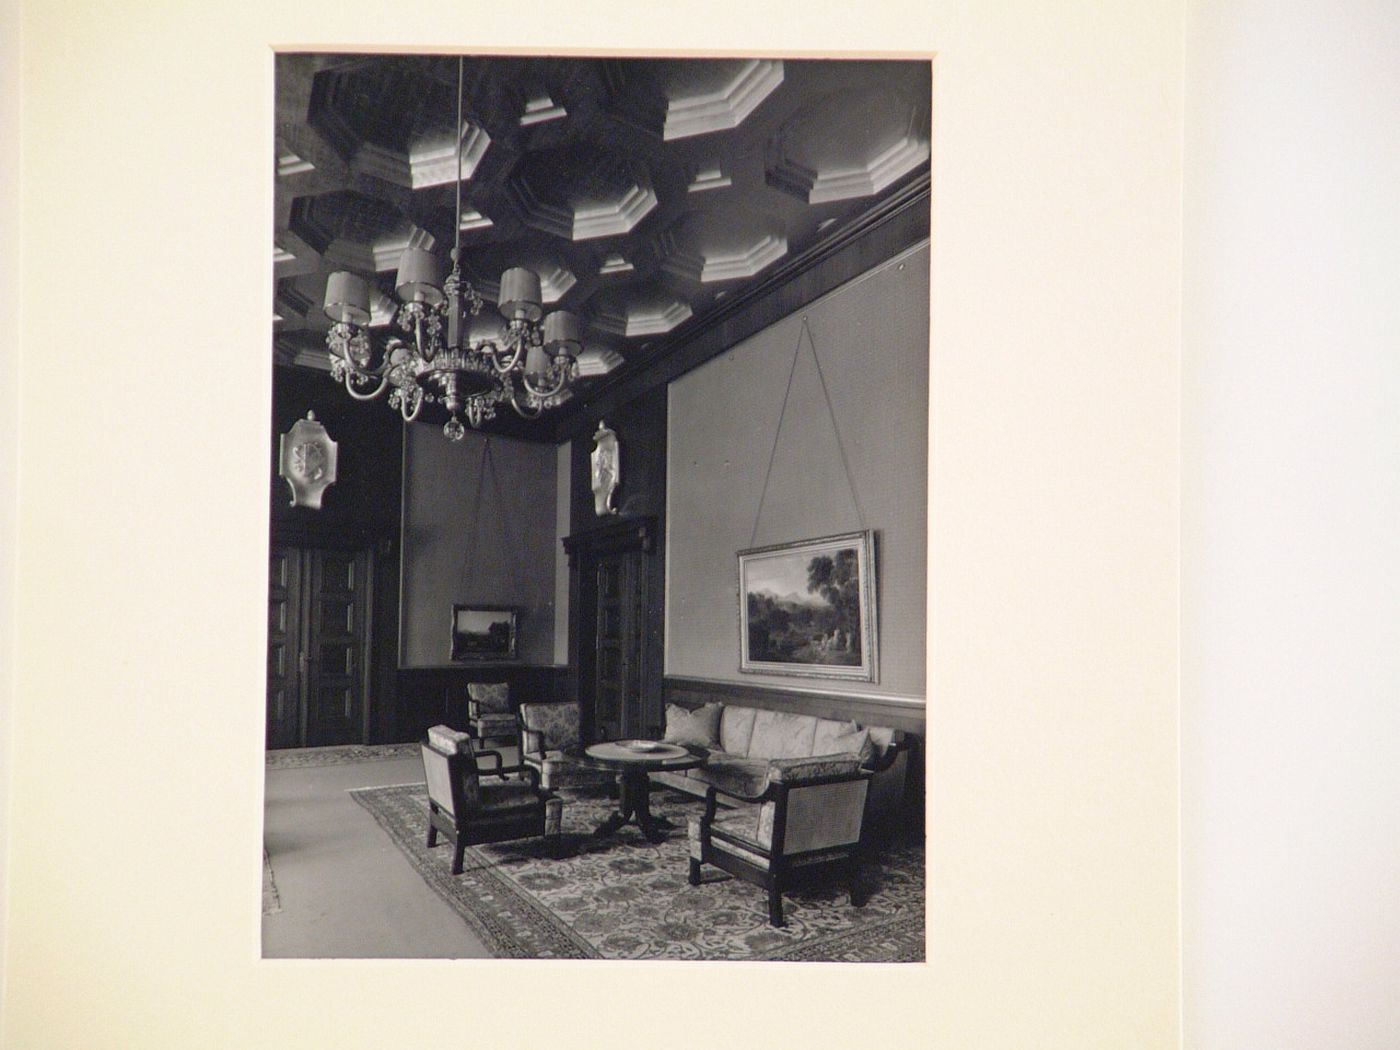 Interior photograph of a large room with coffered ceiling, chandelier, and oil paintings on walls